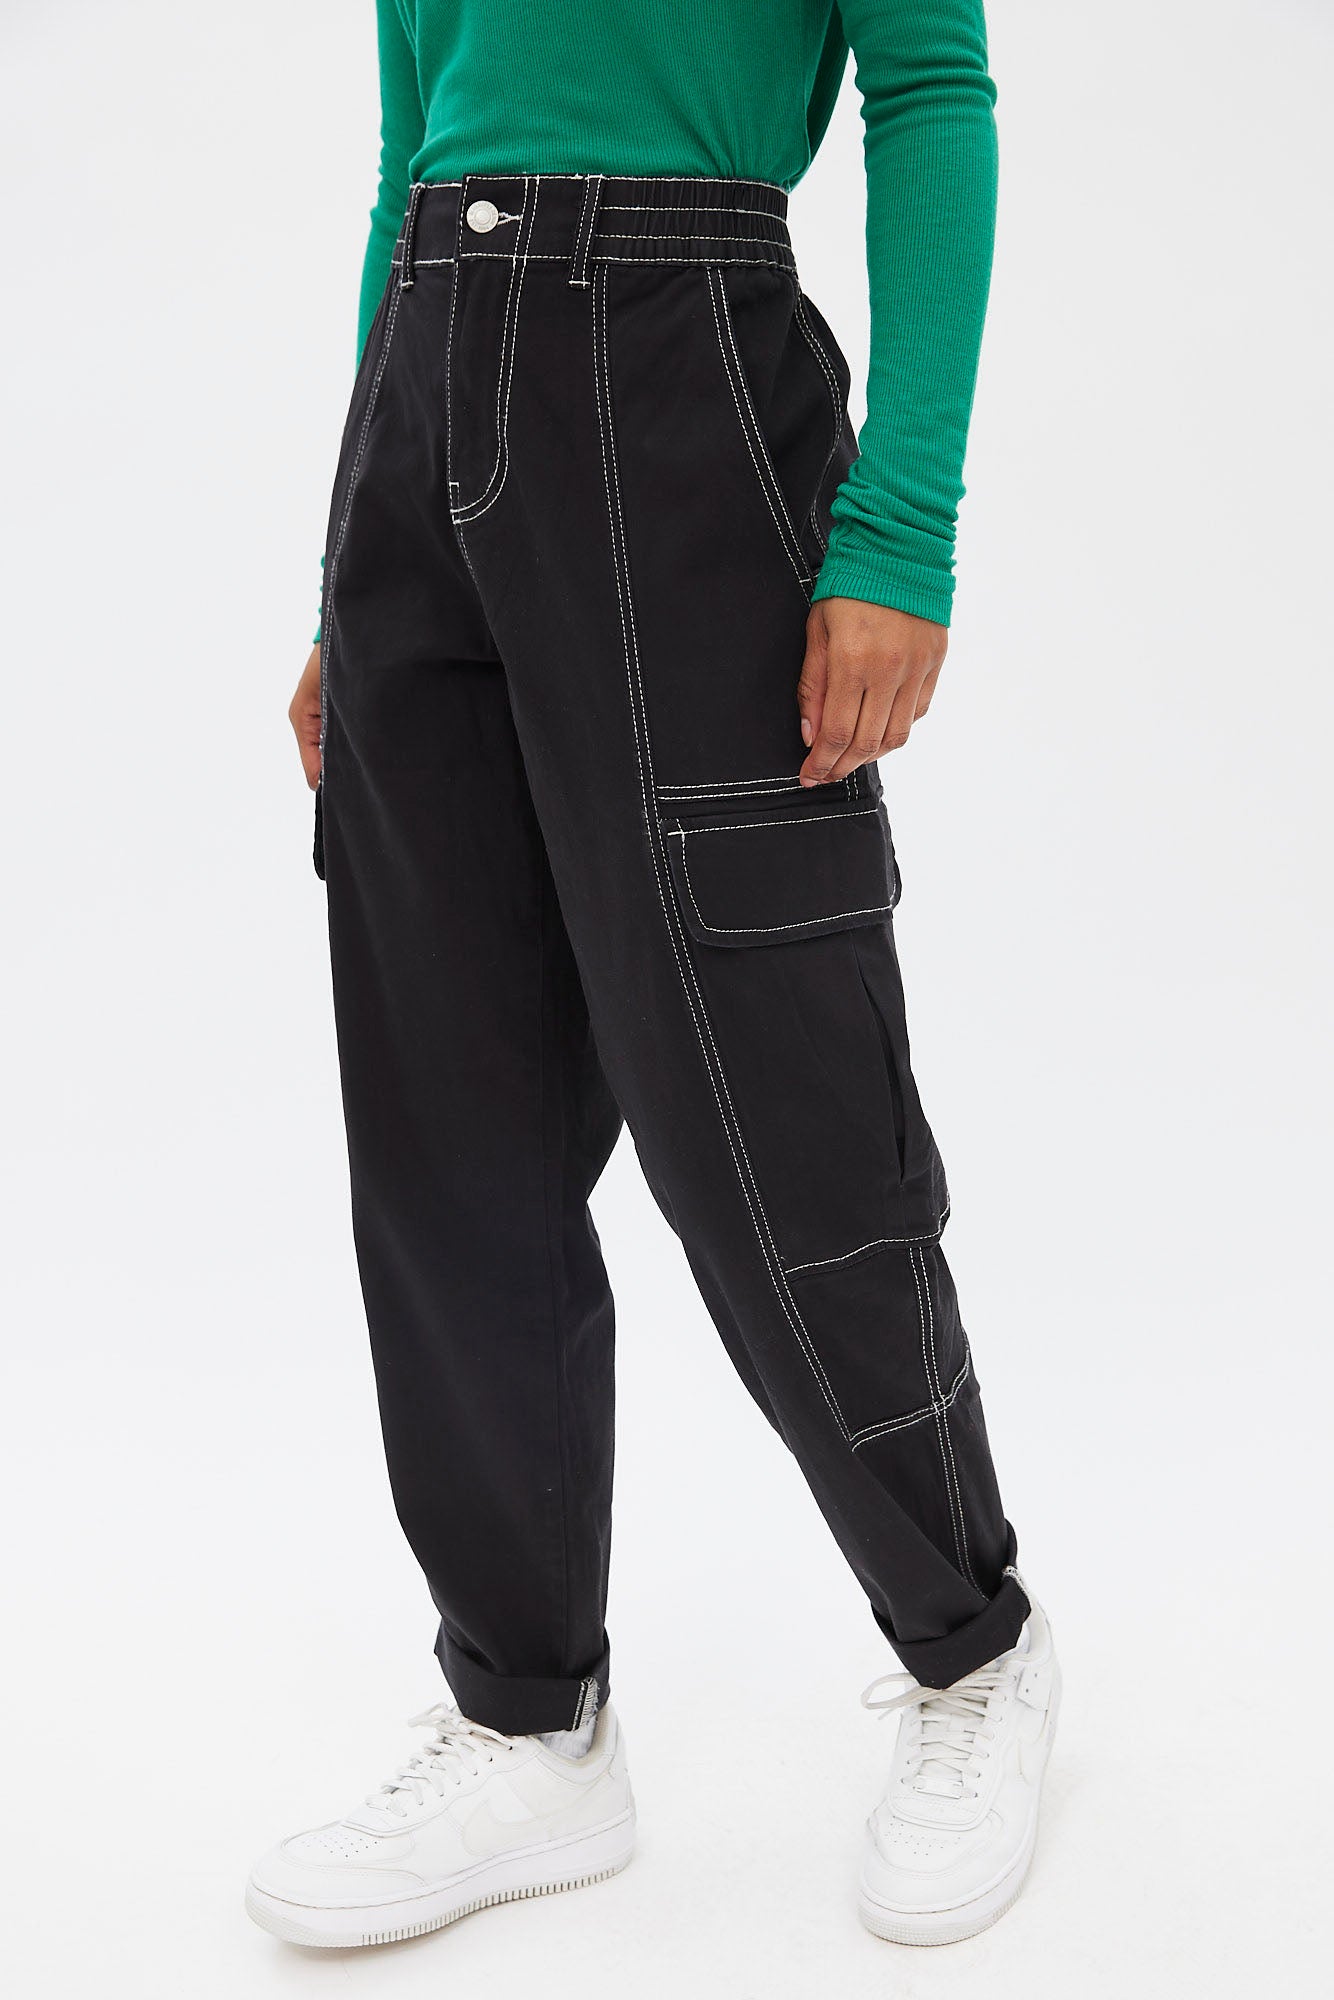 Curvy Straight fit cargo pants with 20% discount!